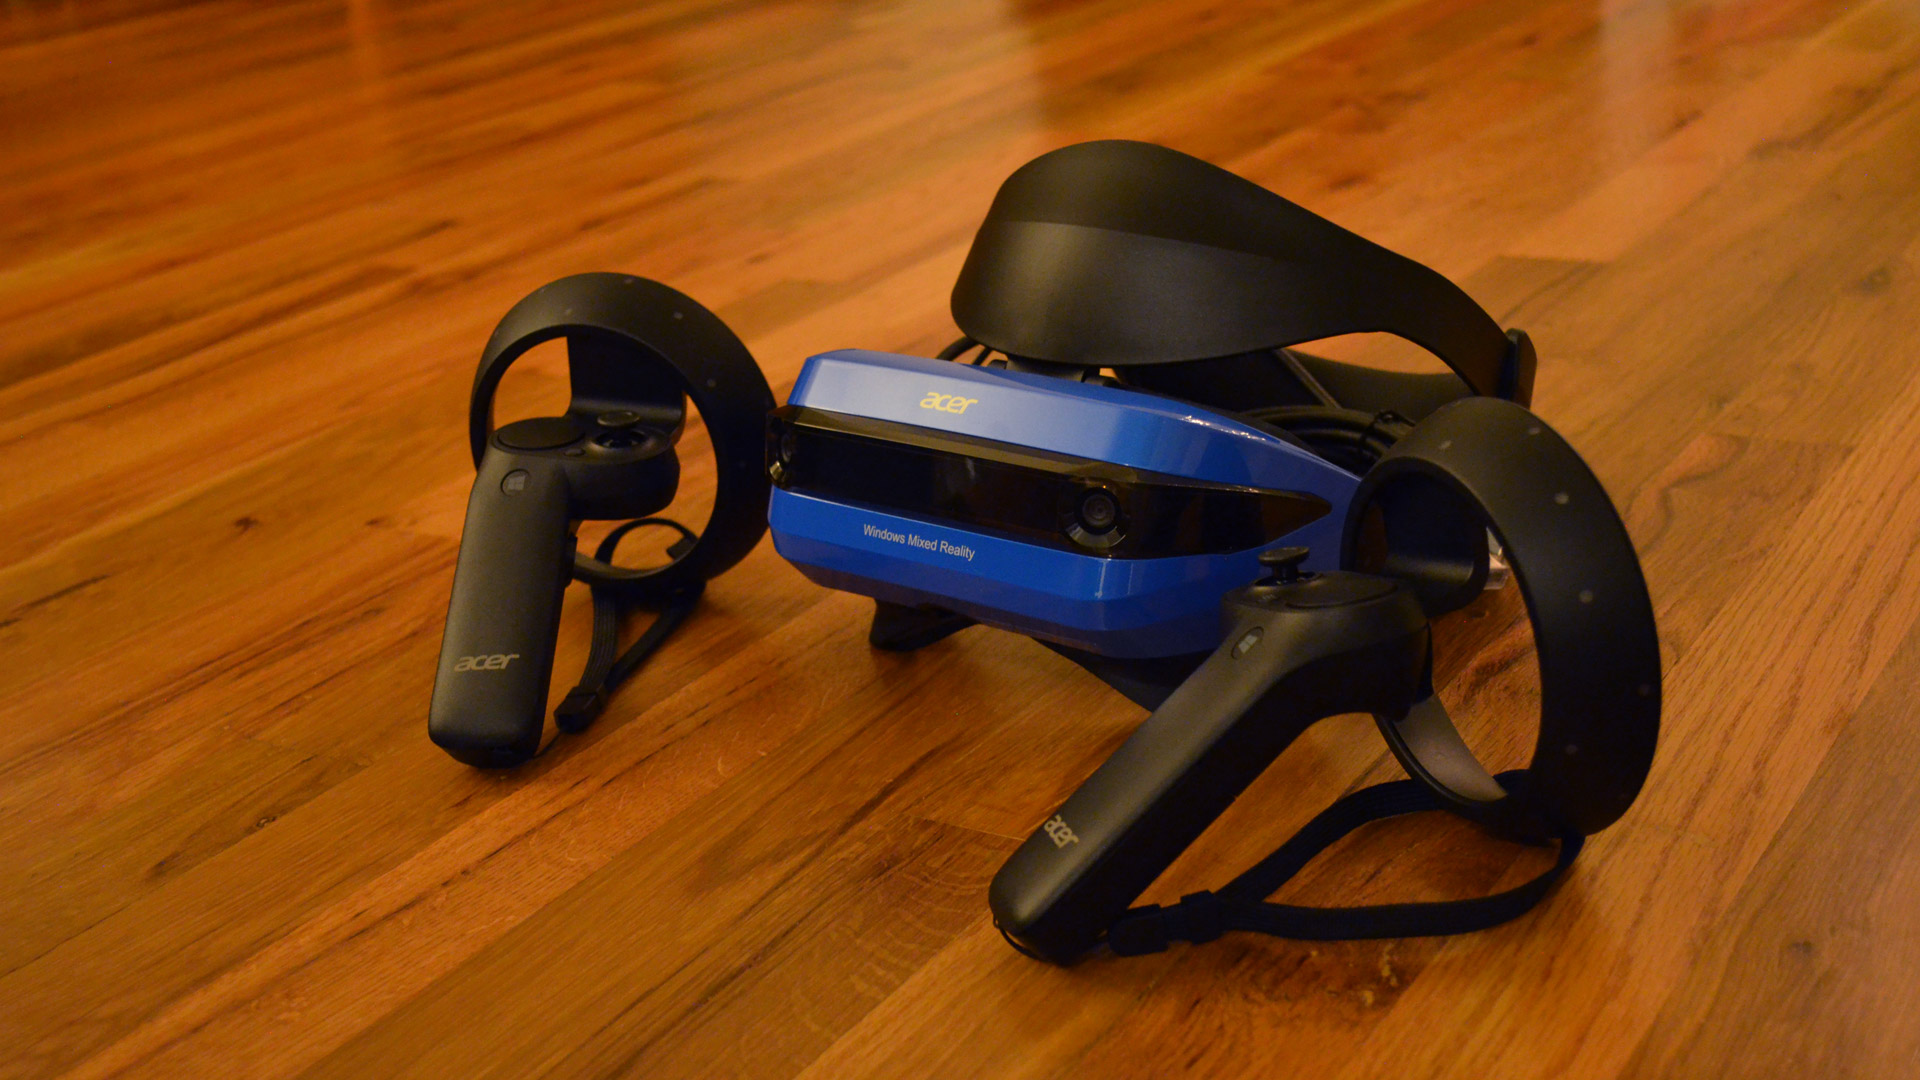 hp windows mixed reality headset review